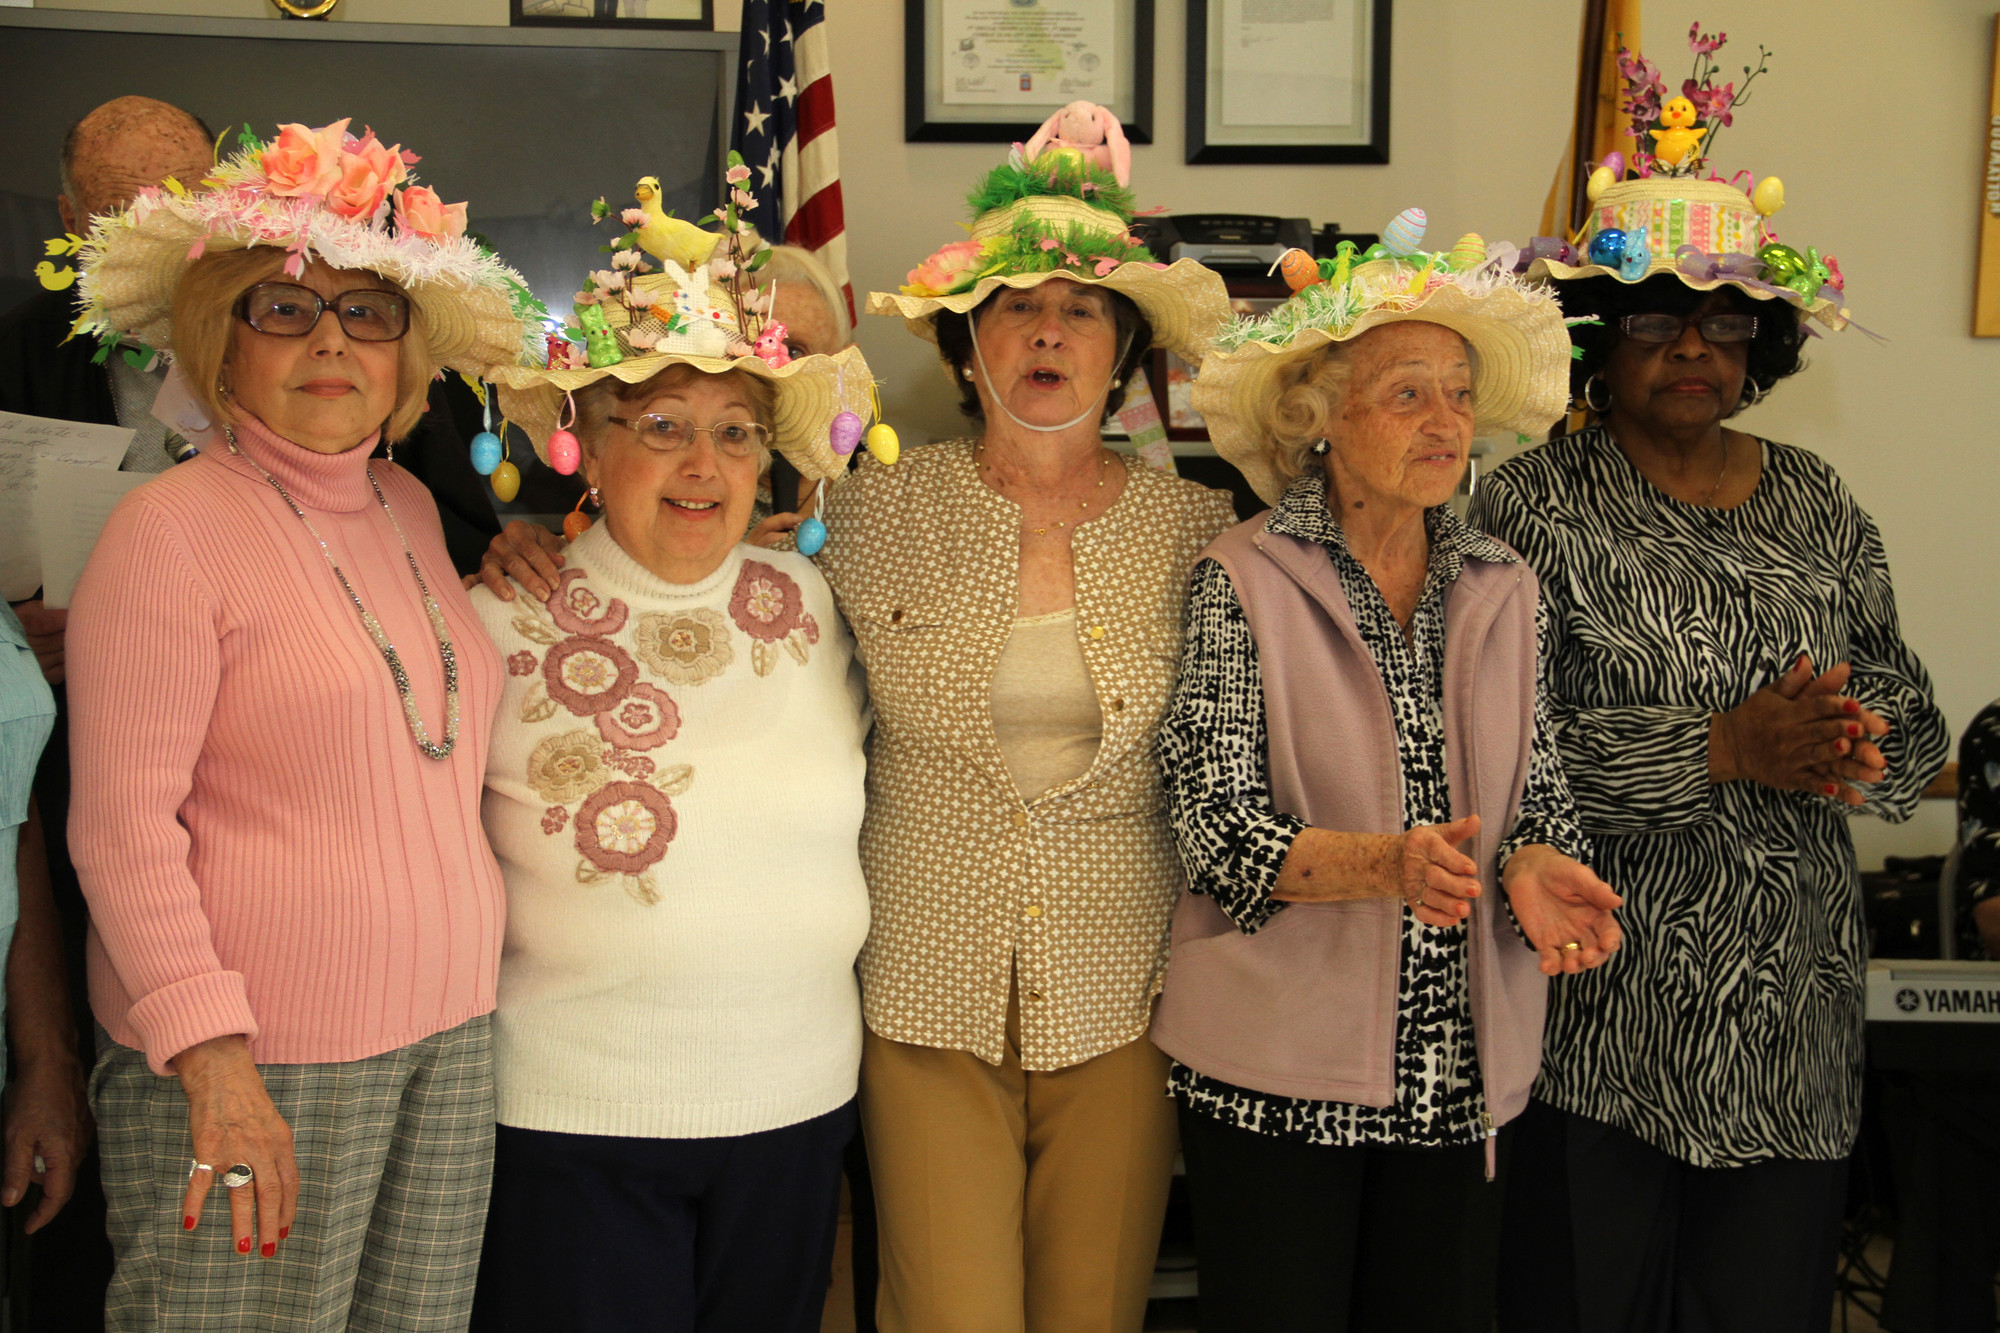 The seniors spent several weeks working on their festive bonnets. From left are Josephina Bellina, Rose LaBruna, Mary Bertelle, Catherine Radnow and Eunice Brewster.